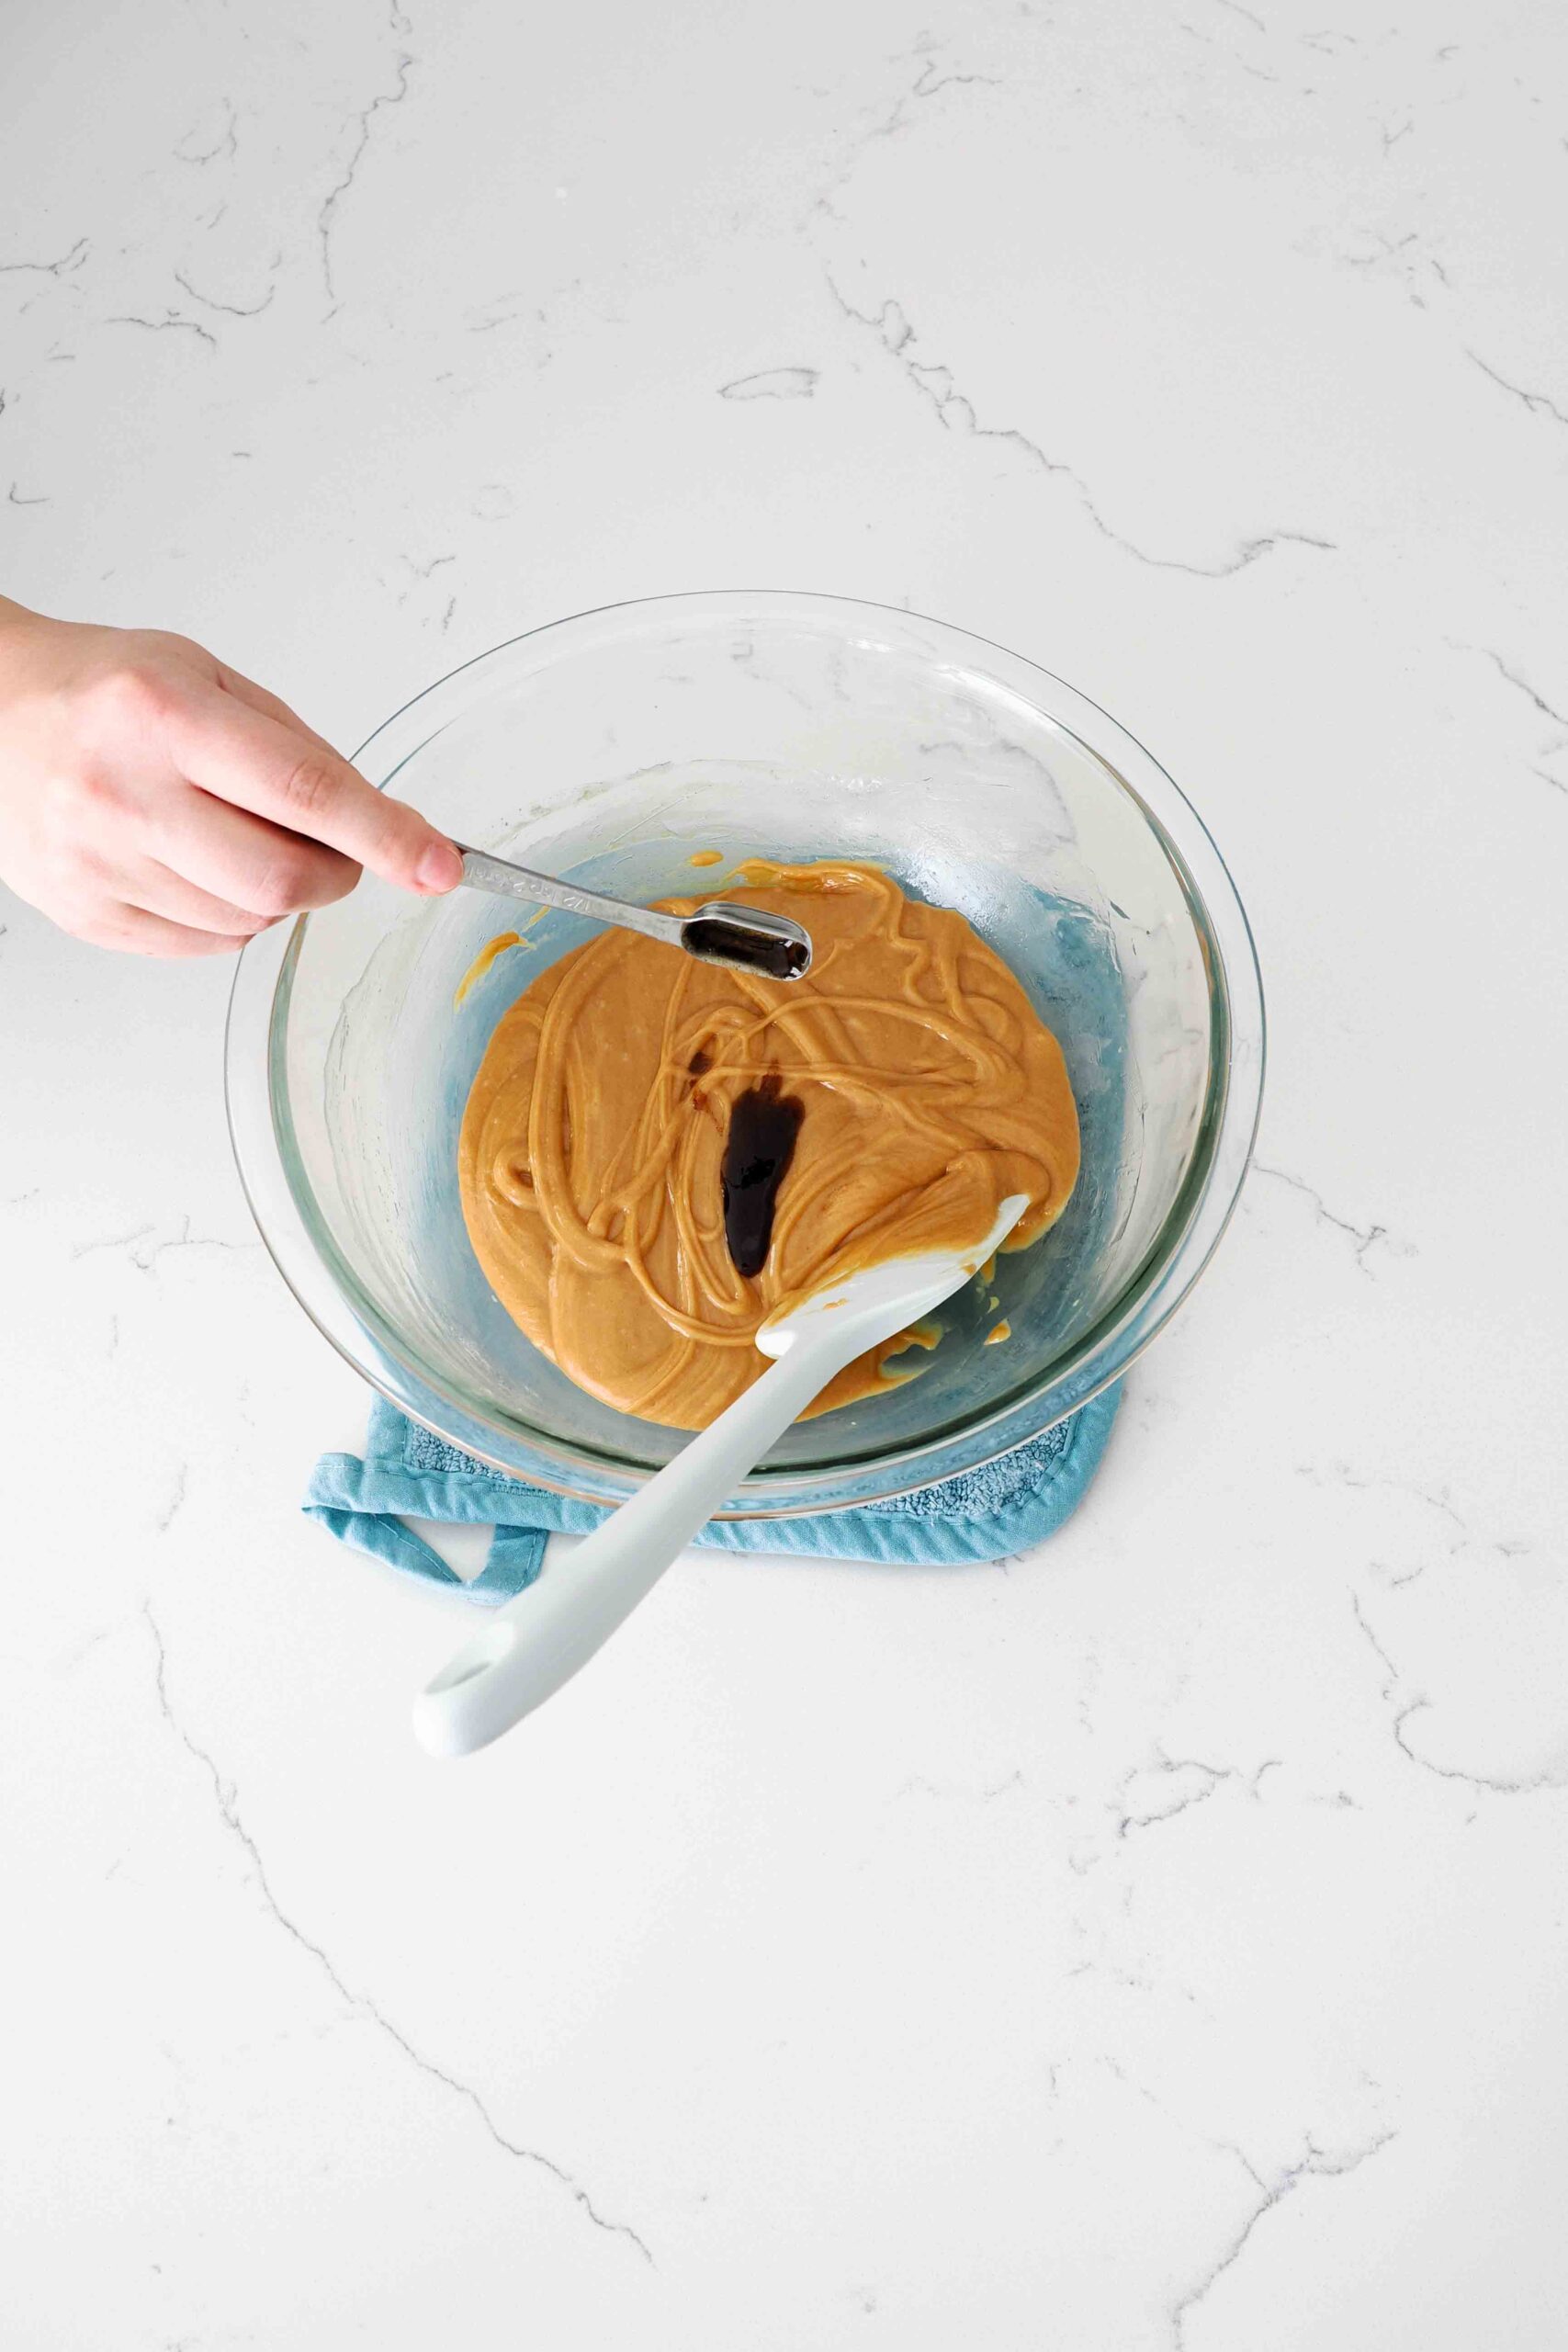 Vanilla extract is poured into a large glass bowl with a peanut butter mixture.